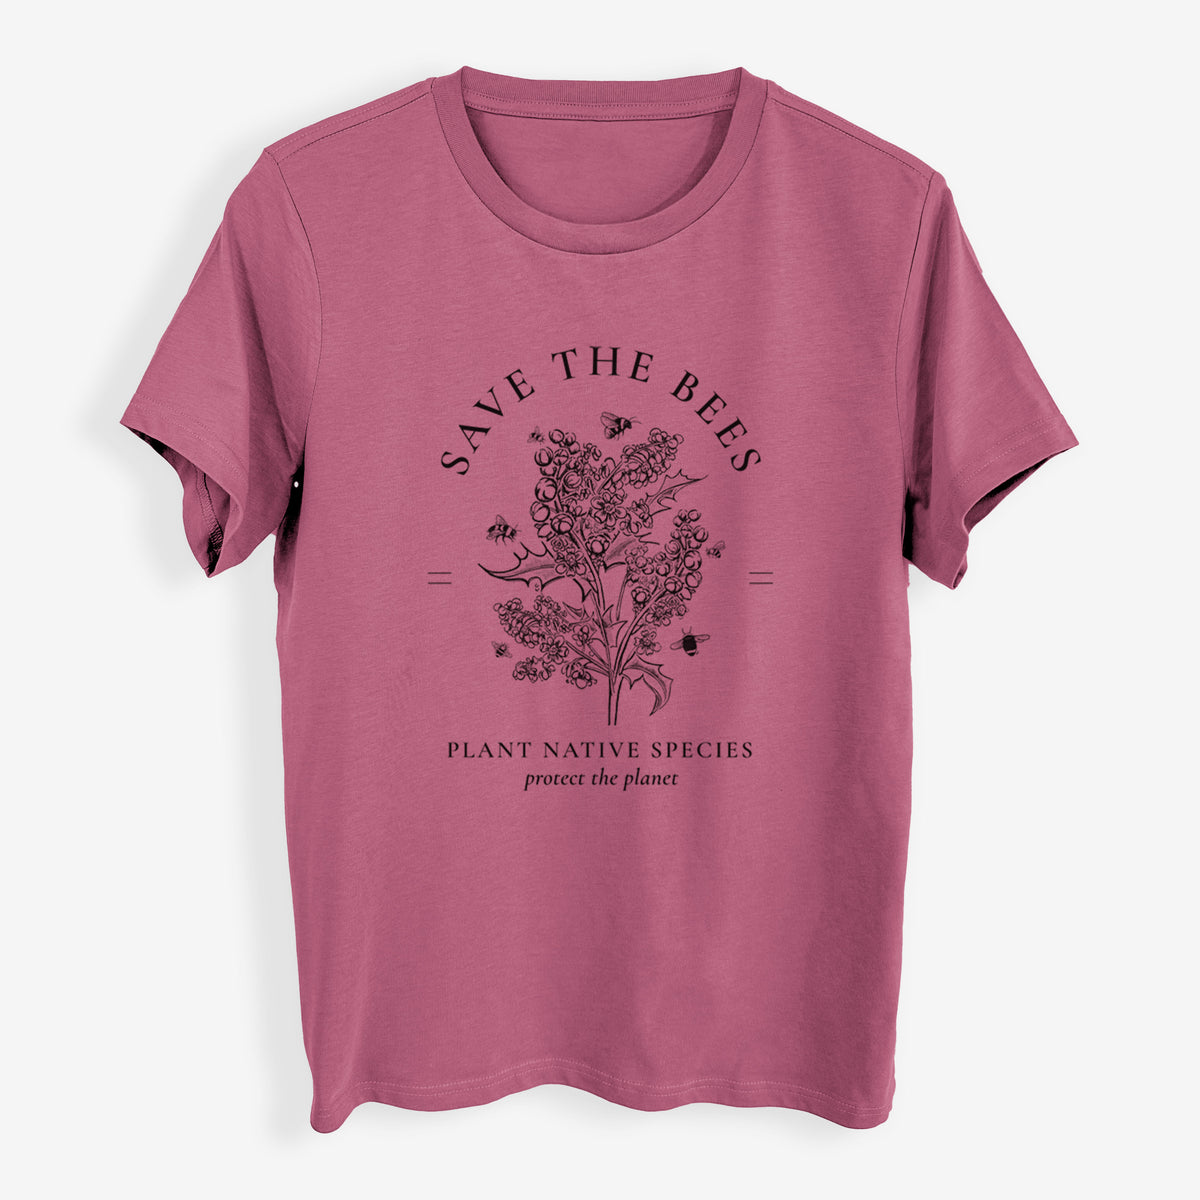 Save the Bees - Plant Native Species - Womens Everyday Maple Tee